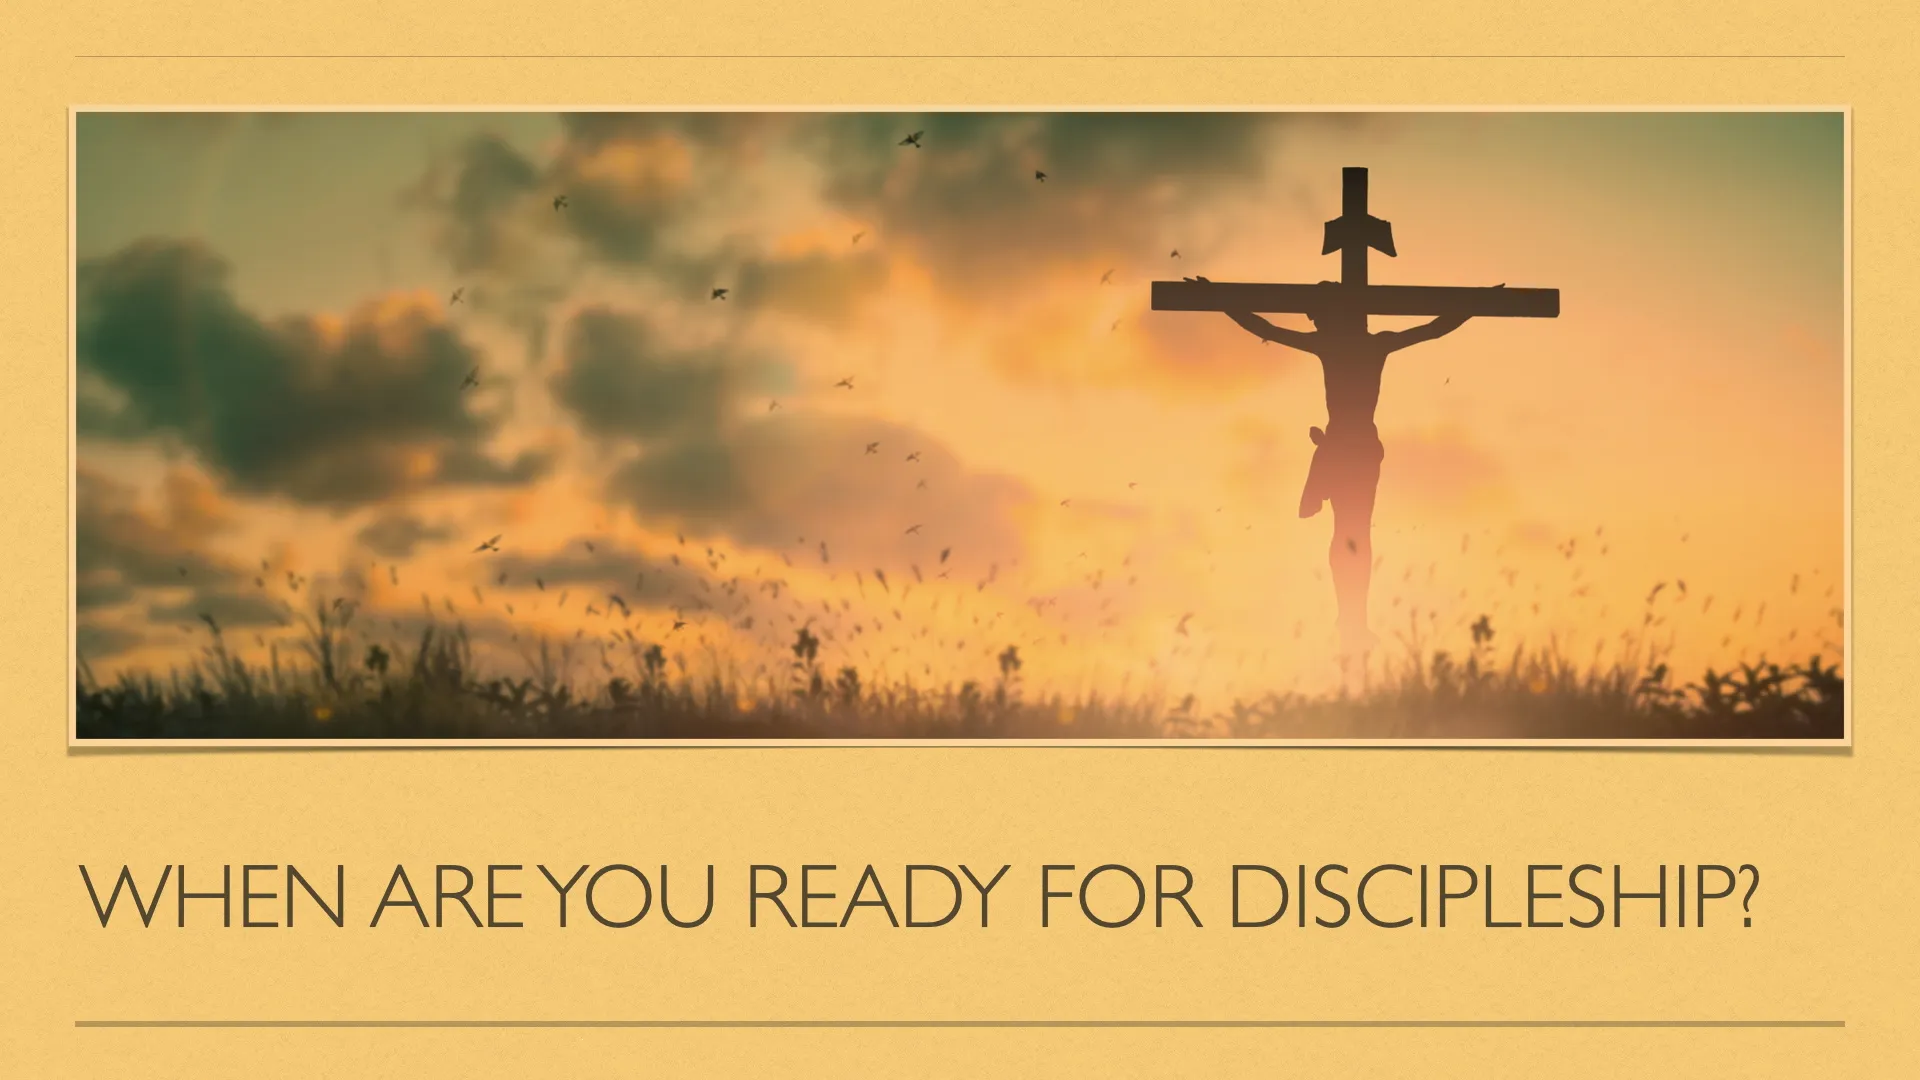 When are you ready for discipleship?